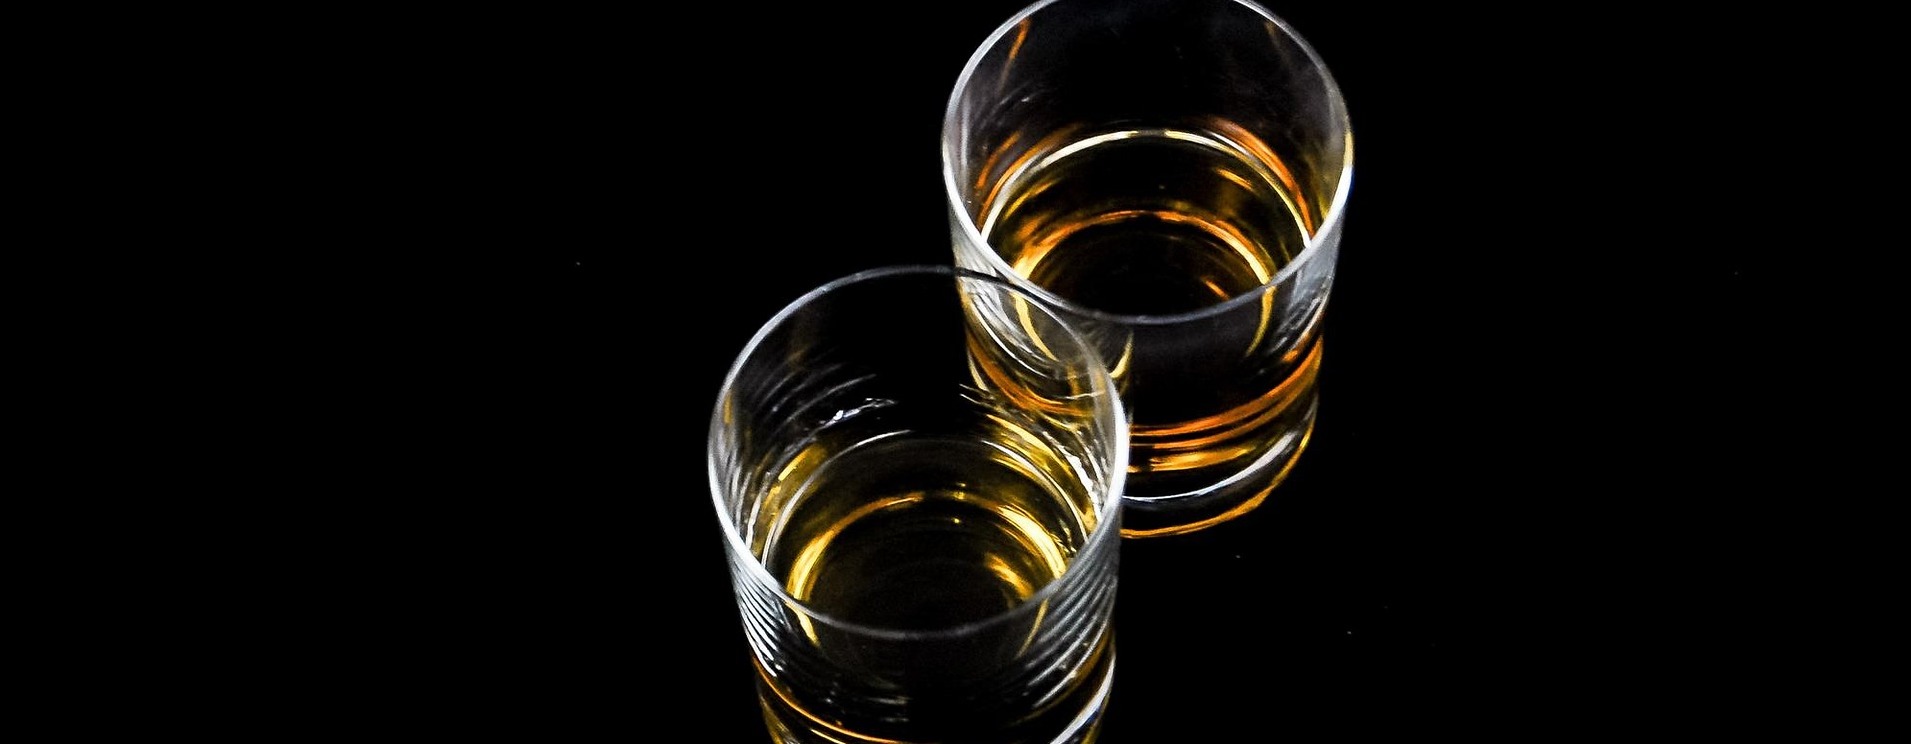 Two glasses of whiskey on a reflective black surface, highlighted by a soft light that accentuates their amber contents.